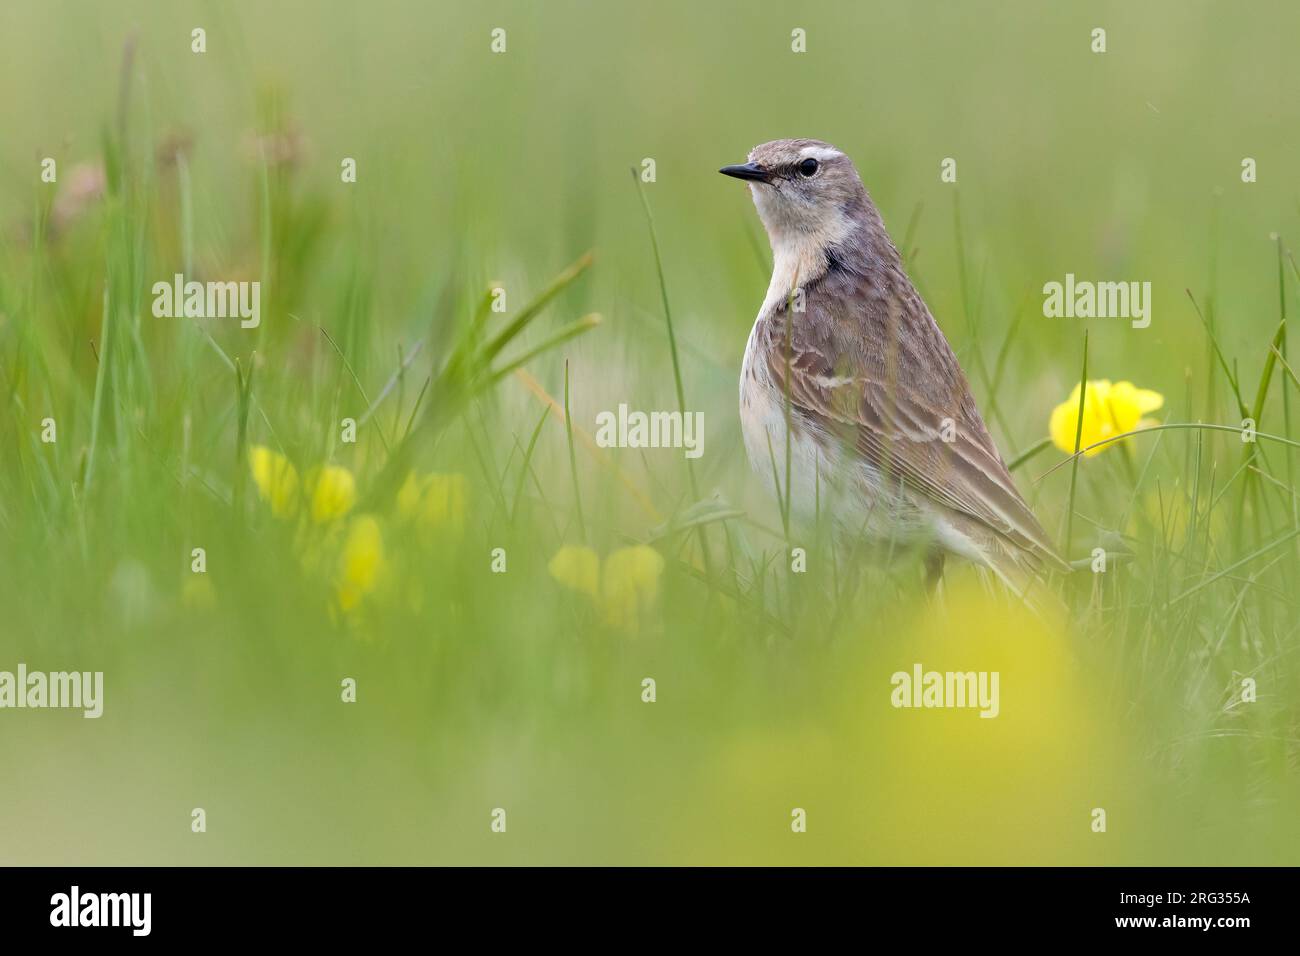 Adult Water Pipit, Anthus spinoletta, during spring in Italy. Stock Photo